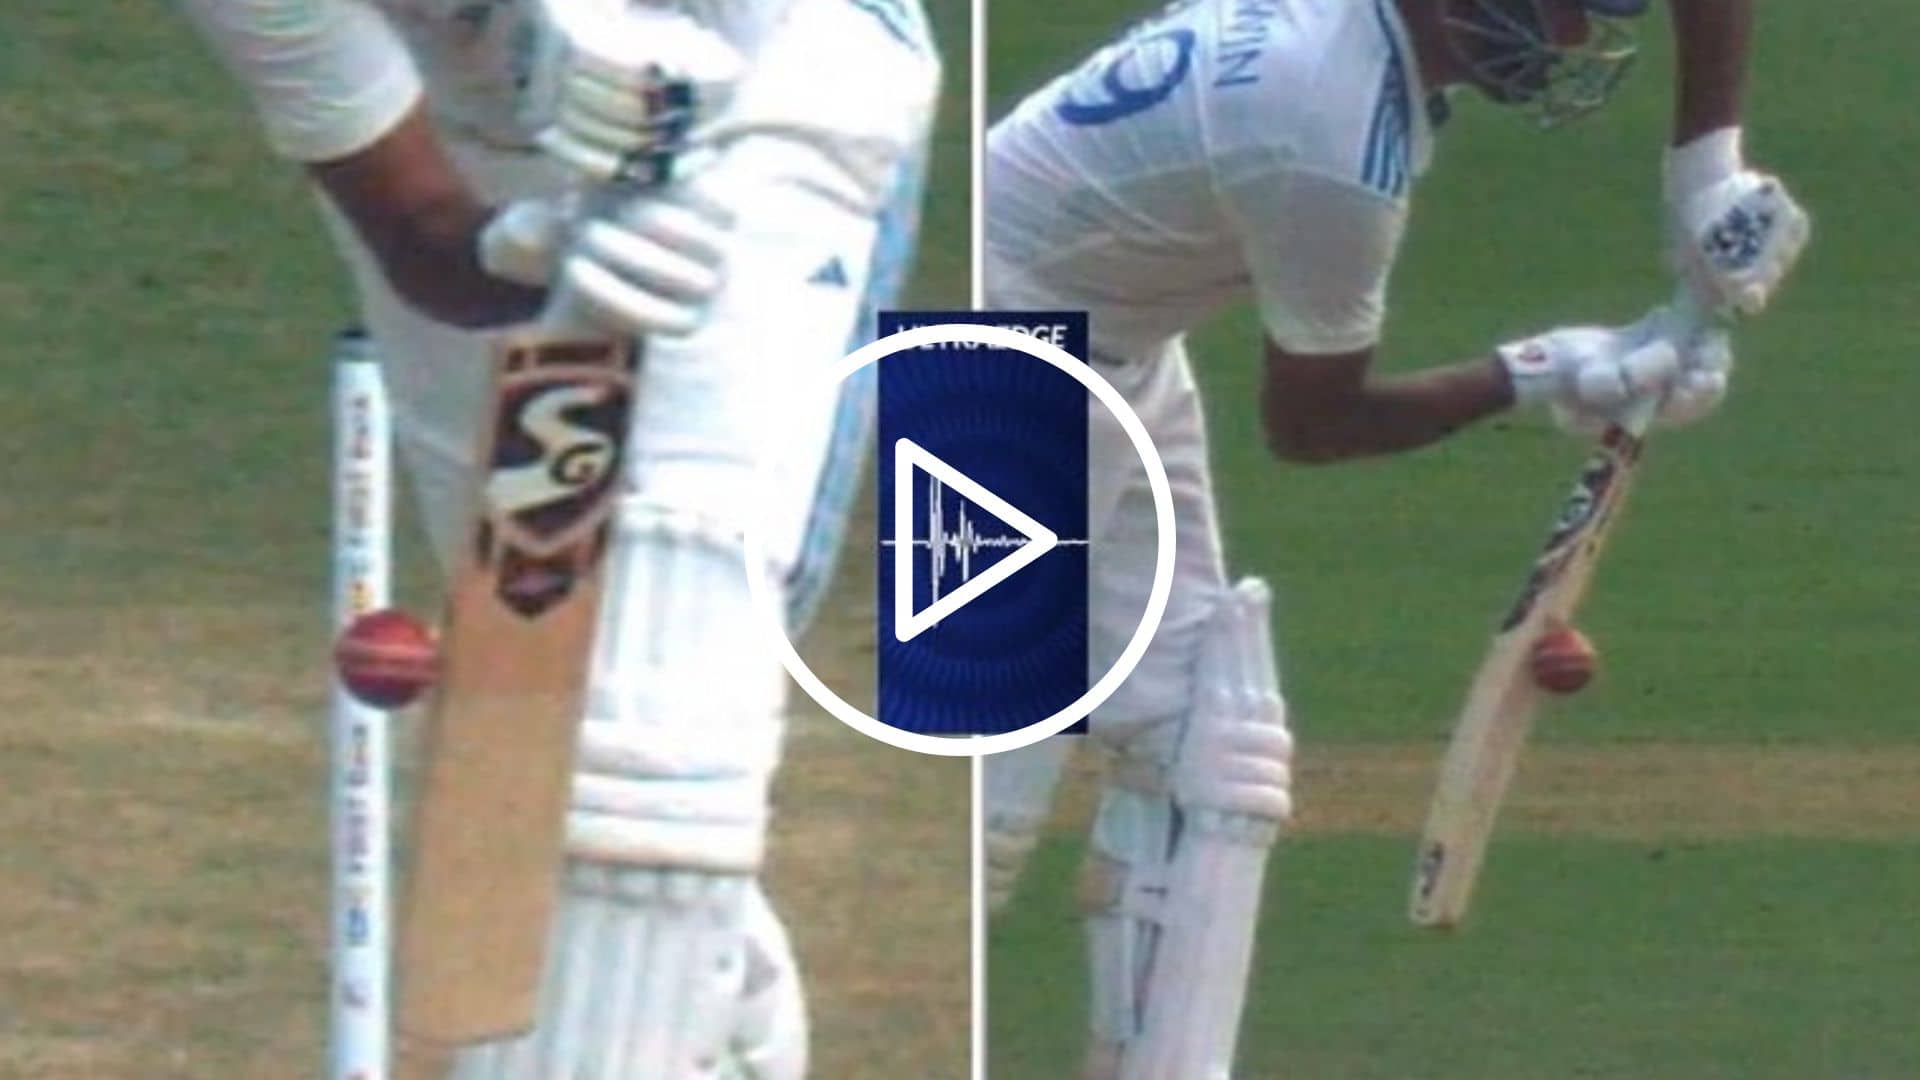 [Watch] James Anderson Dismisses Ashwin With An Absolute Jaffa